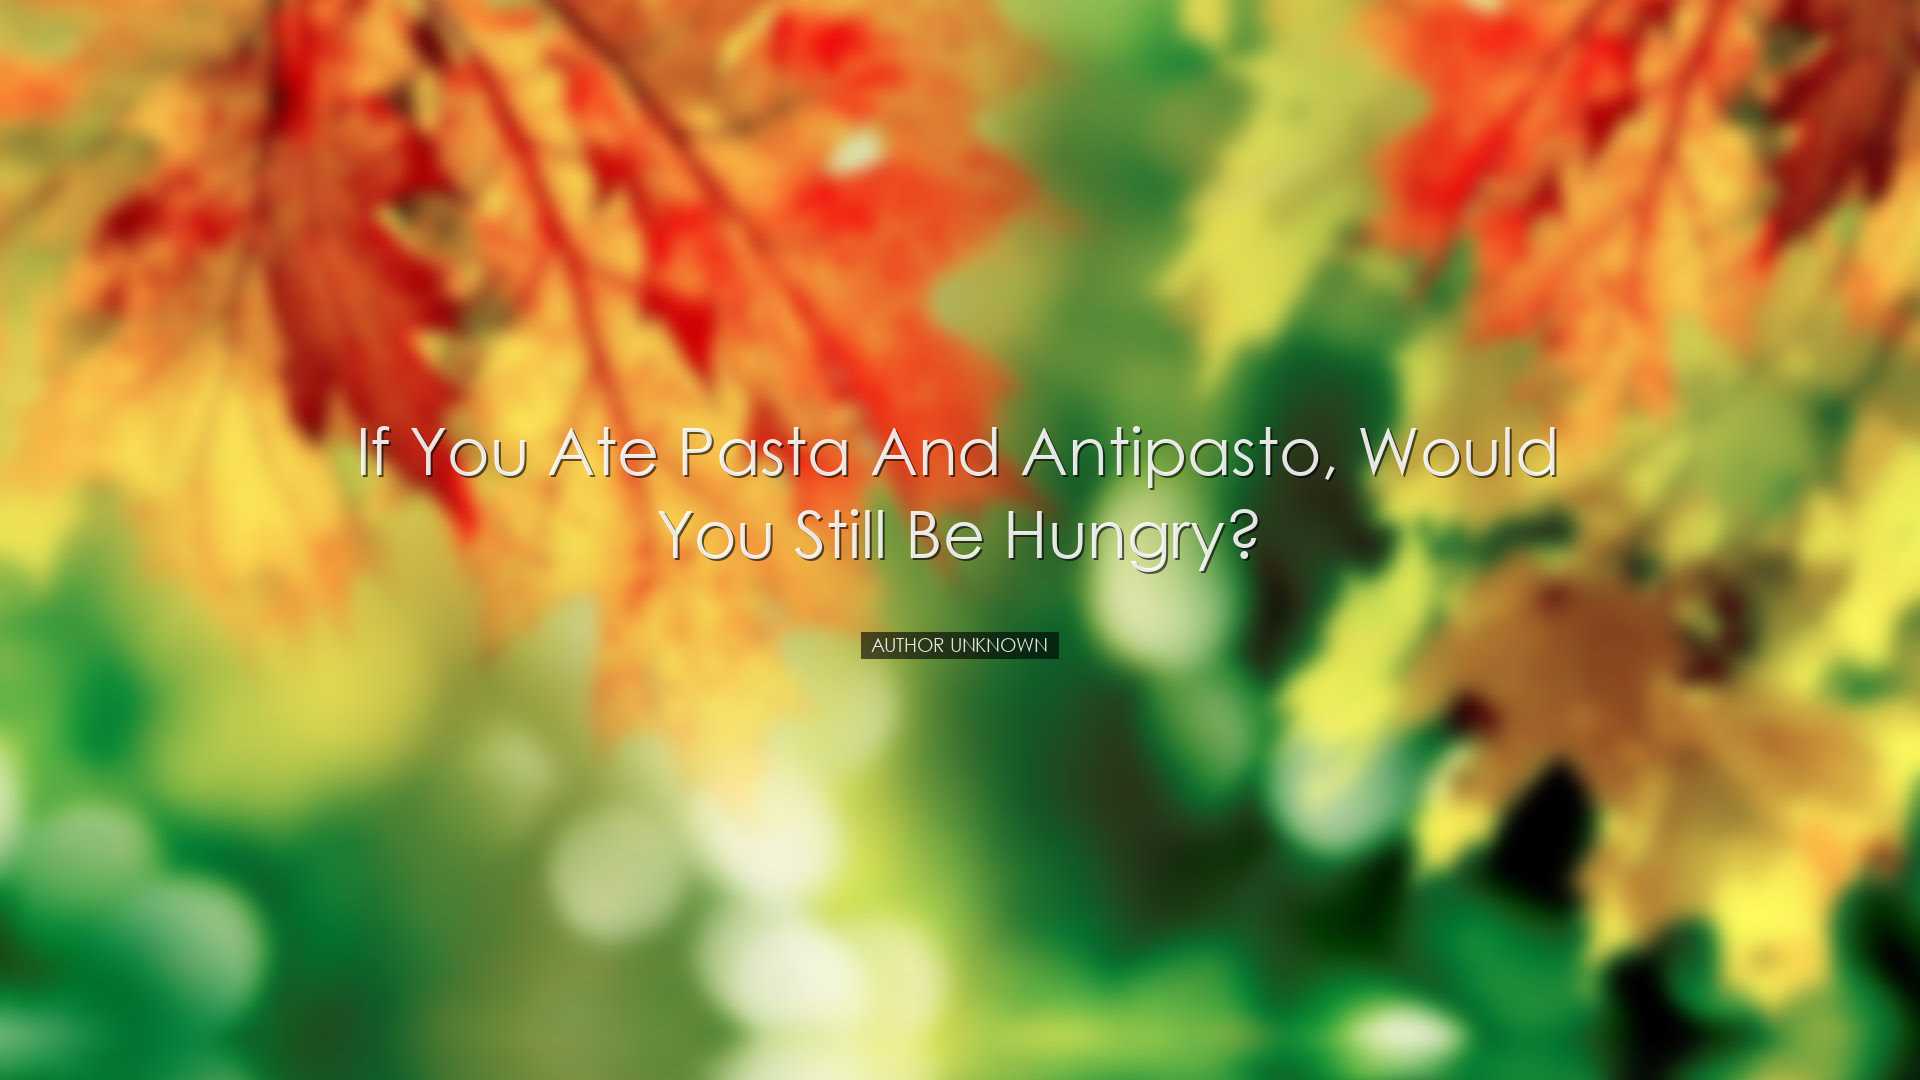 If you ate pasta and antipasto, would you still be hungry? - Autho